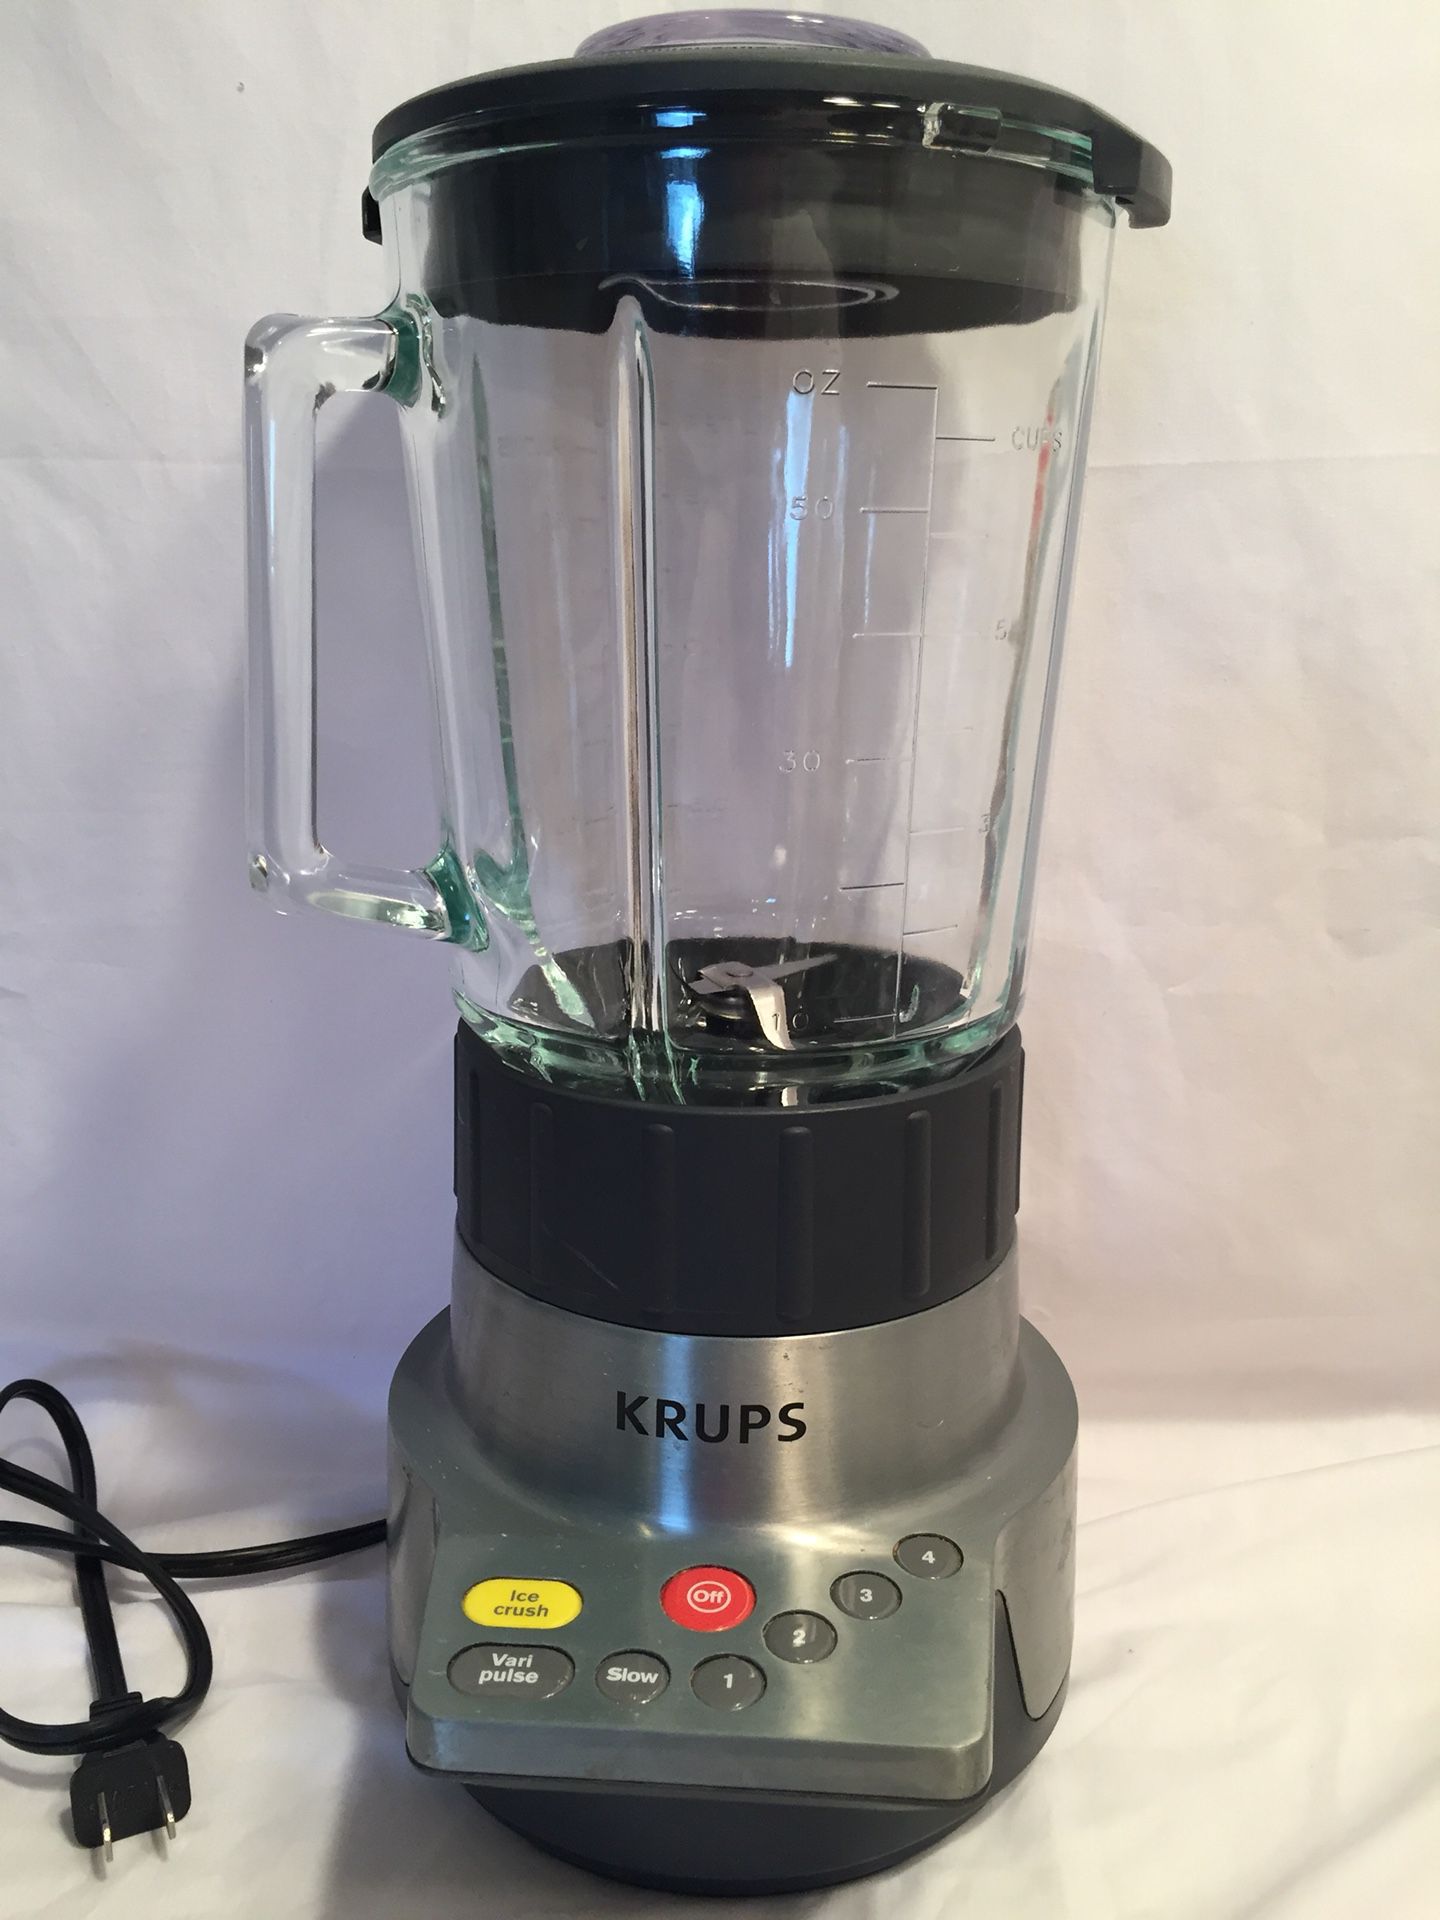 Do housework solid cheese Krups blender KB720 for Sale in Goldsboro, PA - OfferUp